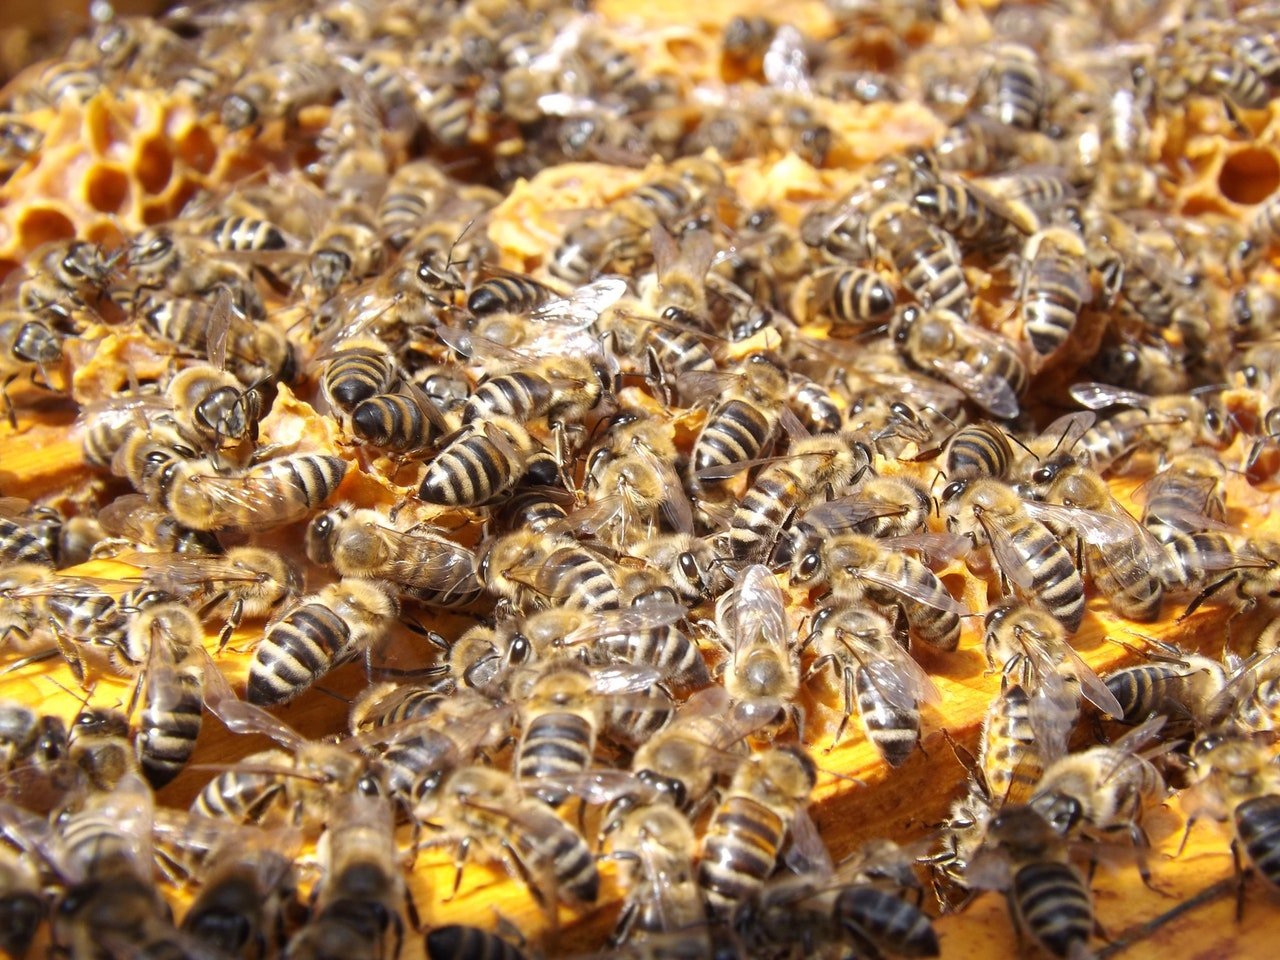 Photo of a swarm of bees | Photo: Pexels